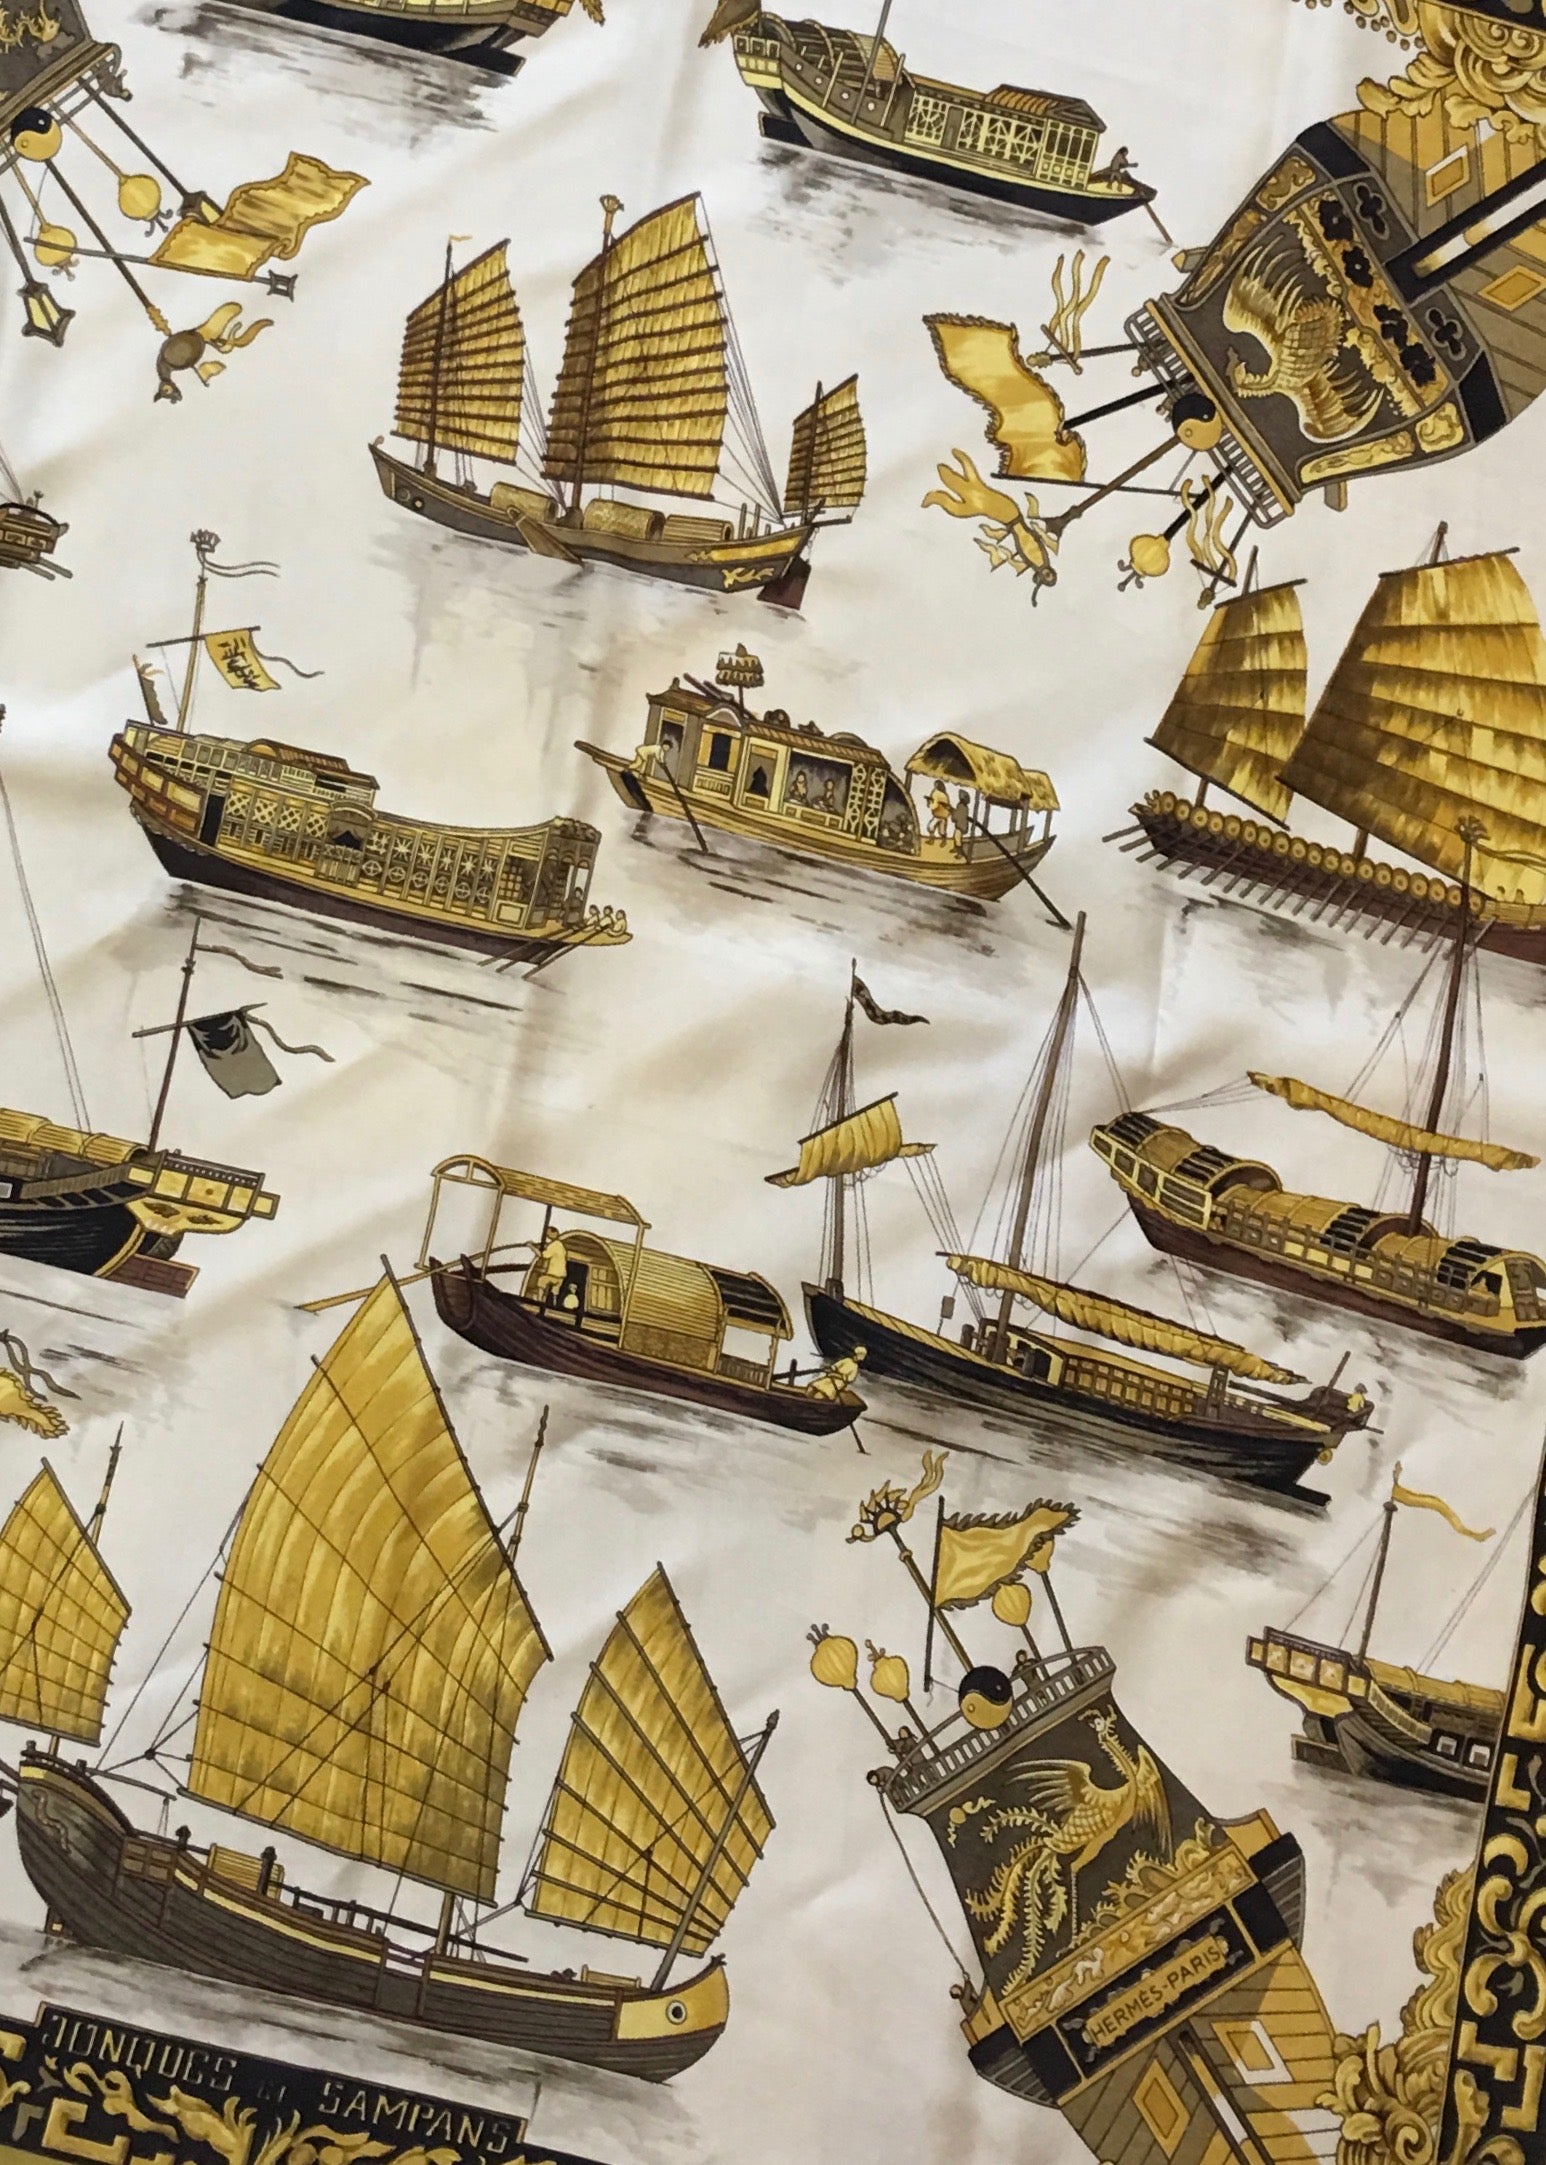 This is my favorite: <a target="_blank" href="https://huffharrington.com/collections/accessories/products/vintage-hermes-scarf-les-jonques-et-sampans">Jonques et Sampans</a>, originally issued in 1966 by Francoise de la Perriere.